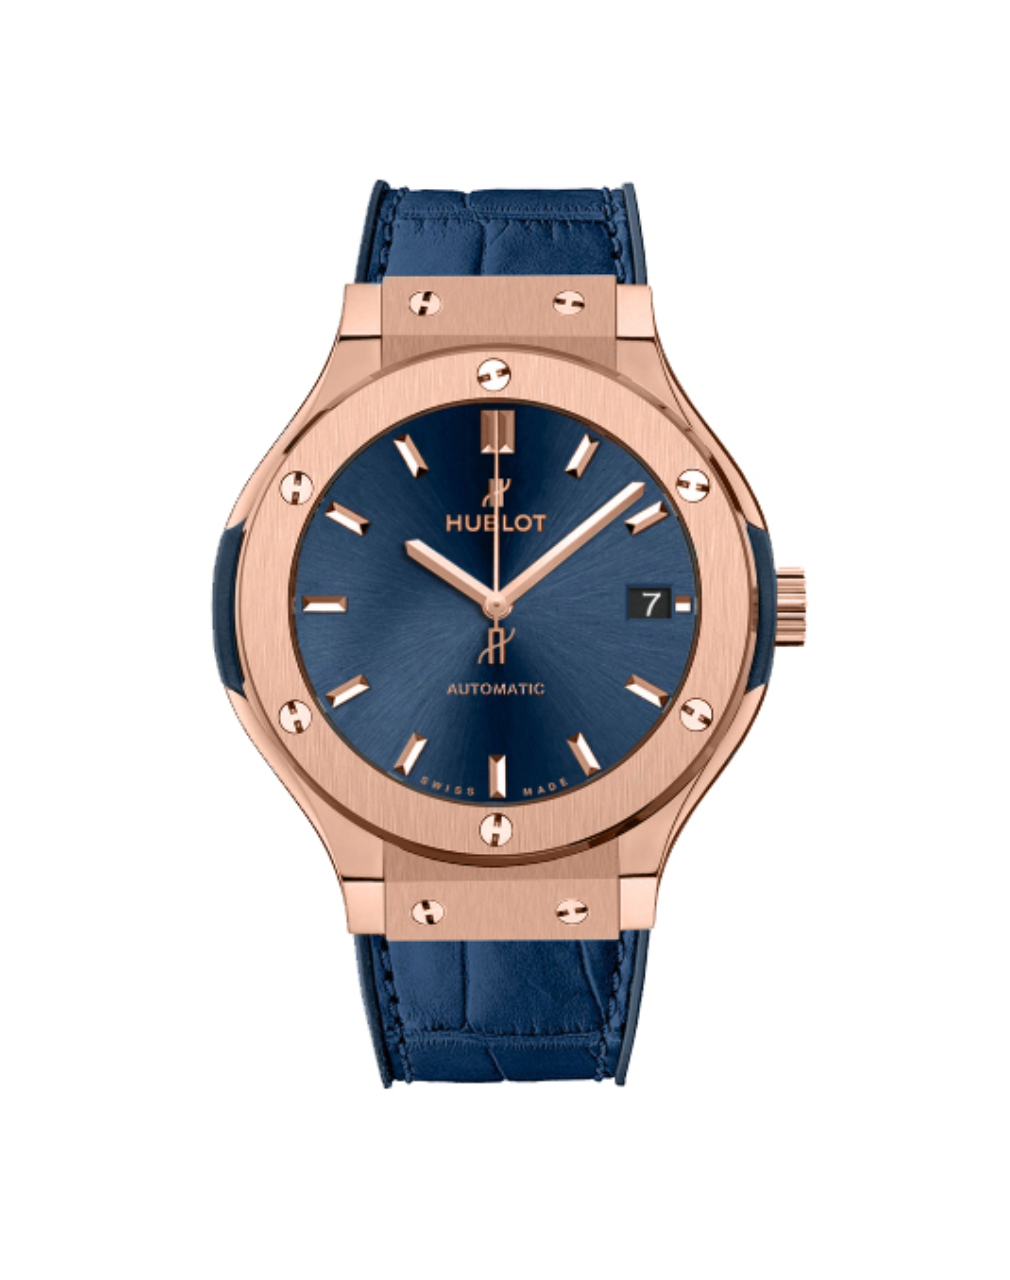 Classic Fusion King Gold Blue 38mm 565.OX.7180.LR